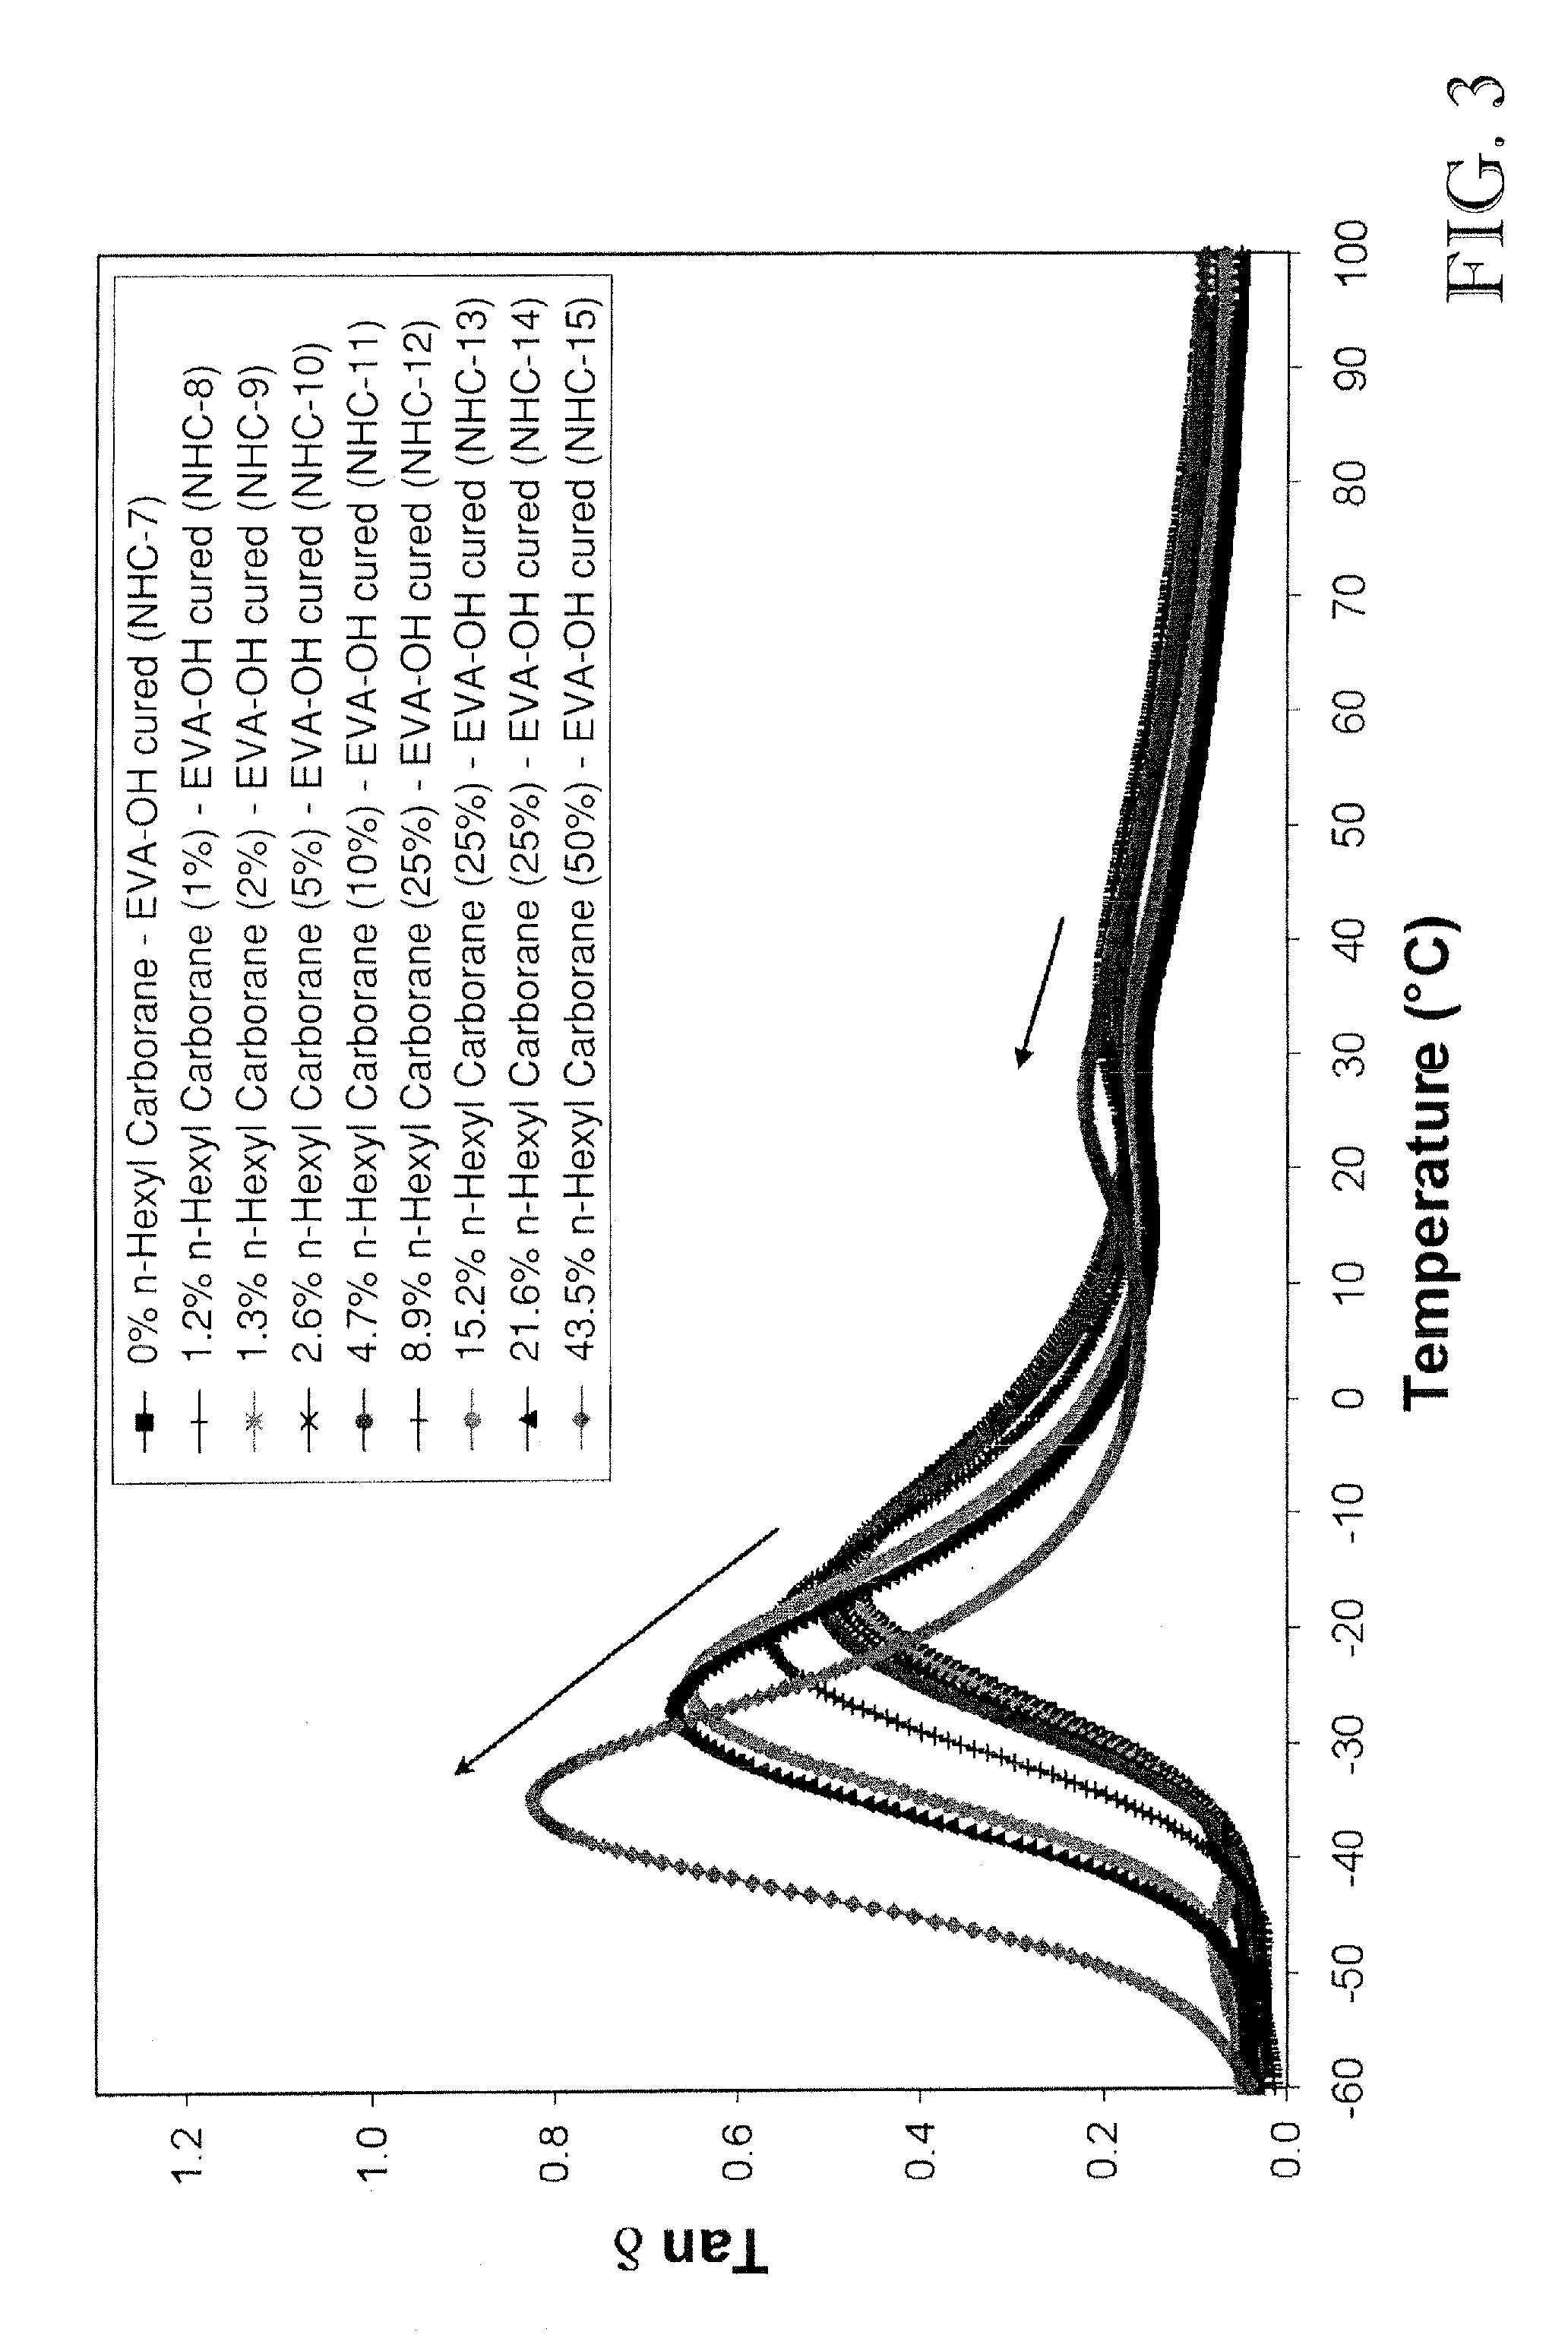 Compositions containing borane or carborane cage compounds and related applications